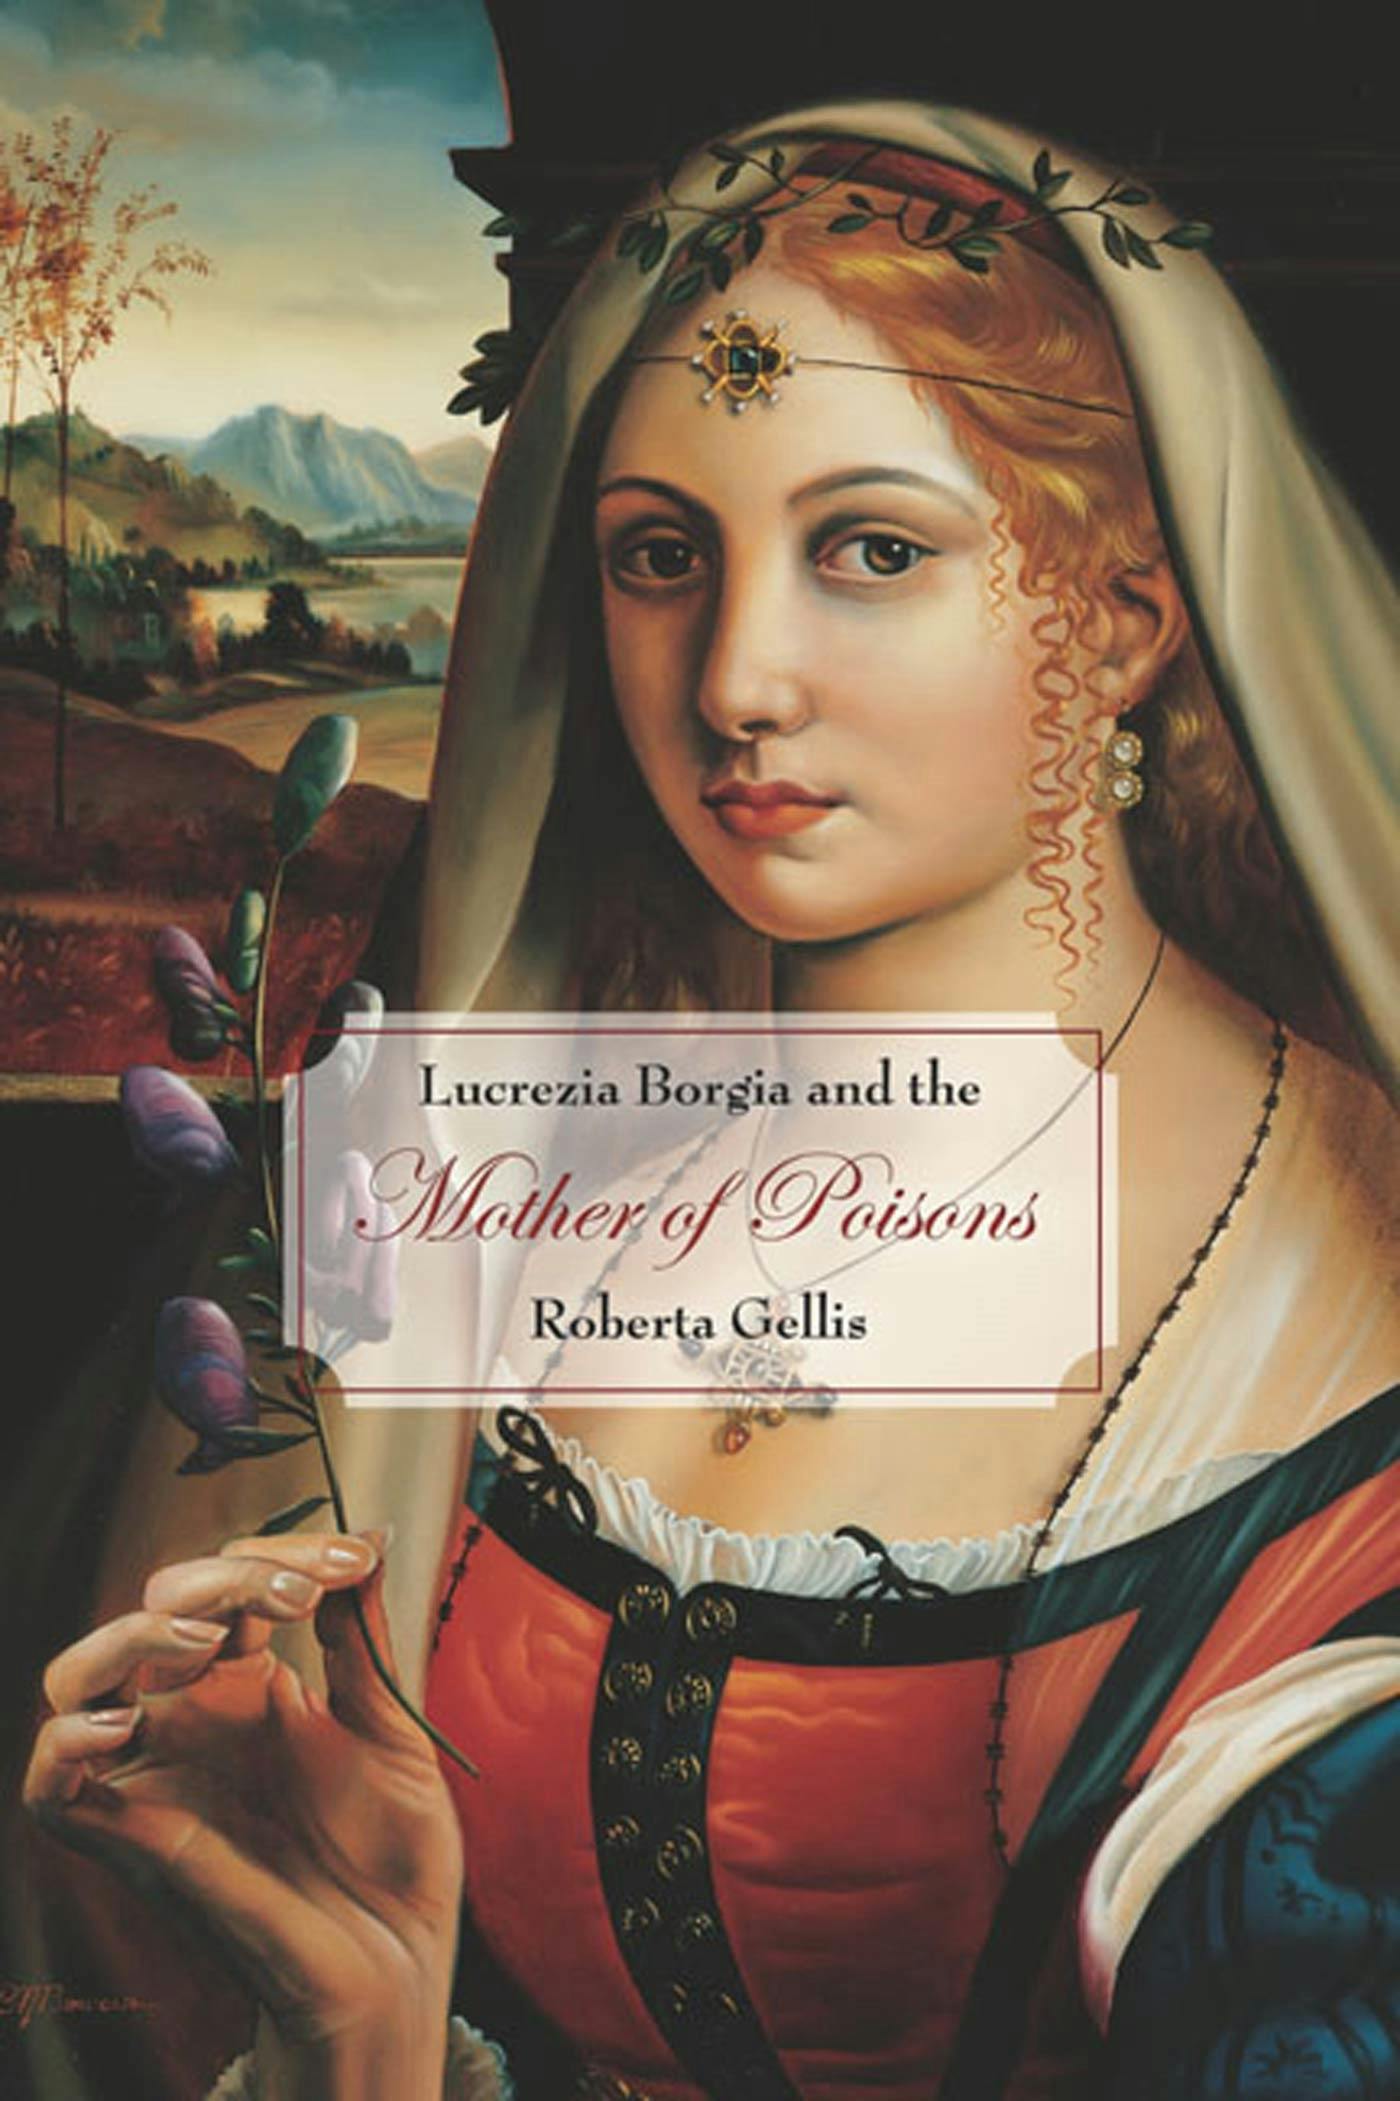 Cover for the book titled as: Lucrezia Borgia and the Mother of Poisons